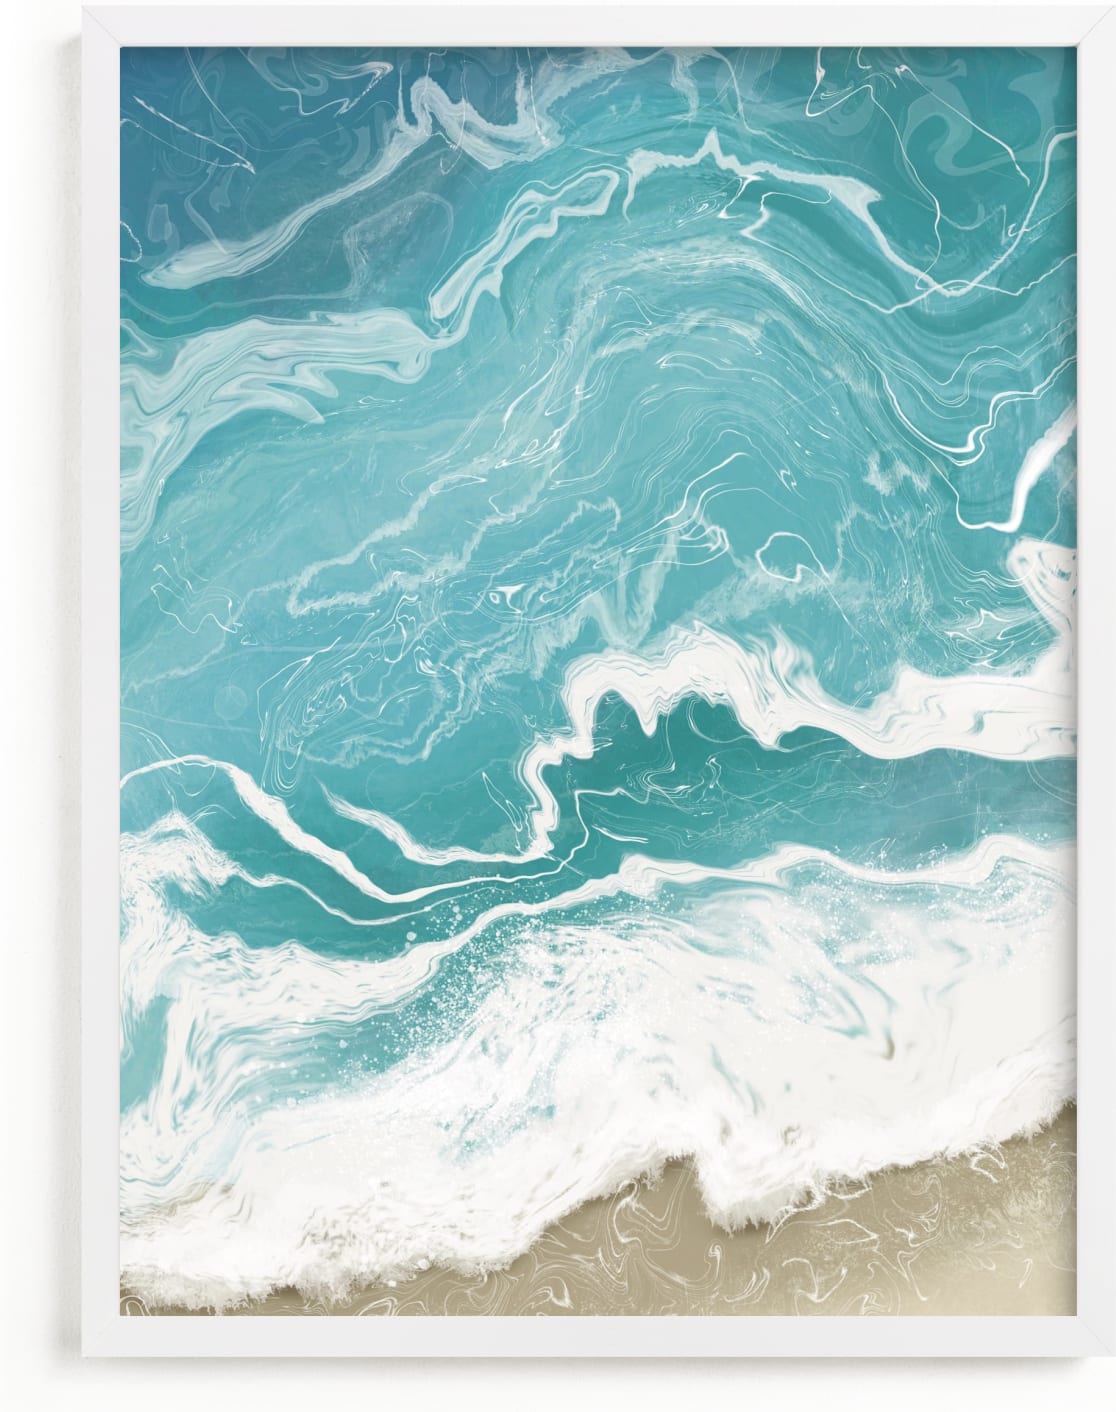 This is a blue art by Paula Pecevich called Incoming Tide.